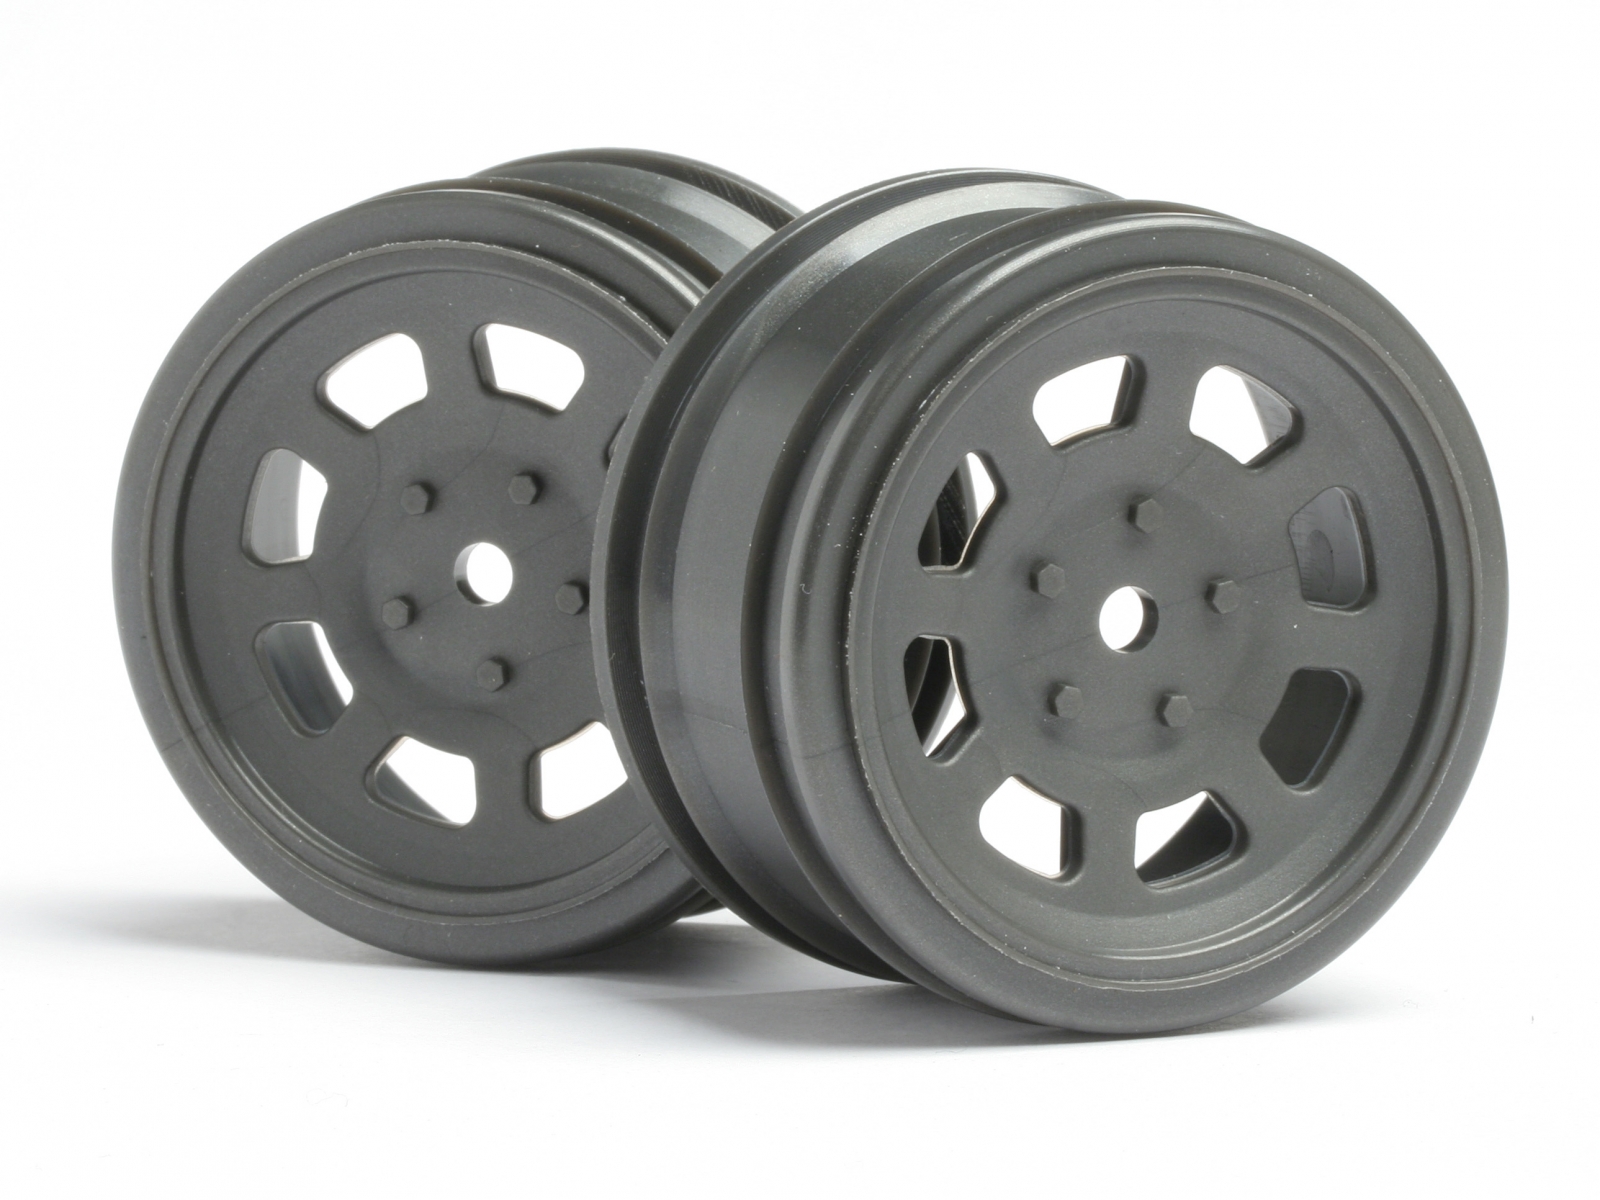 WHEELS FOR VINTAGE MUSCLE CARS AND HOT RODS - SHOPVINTAGEWHEELS.COM